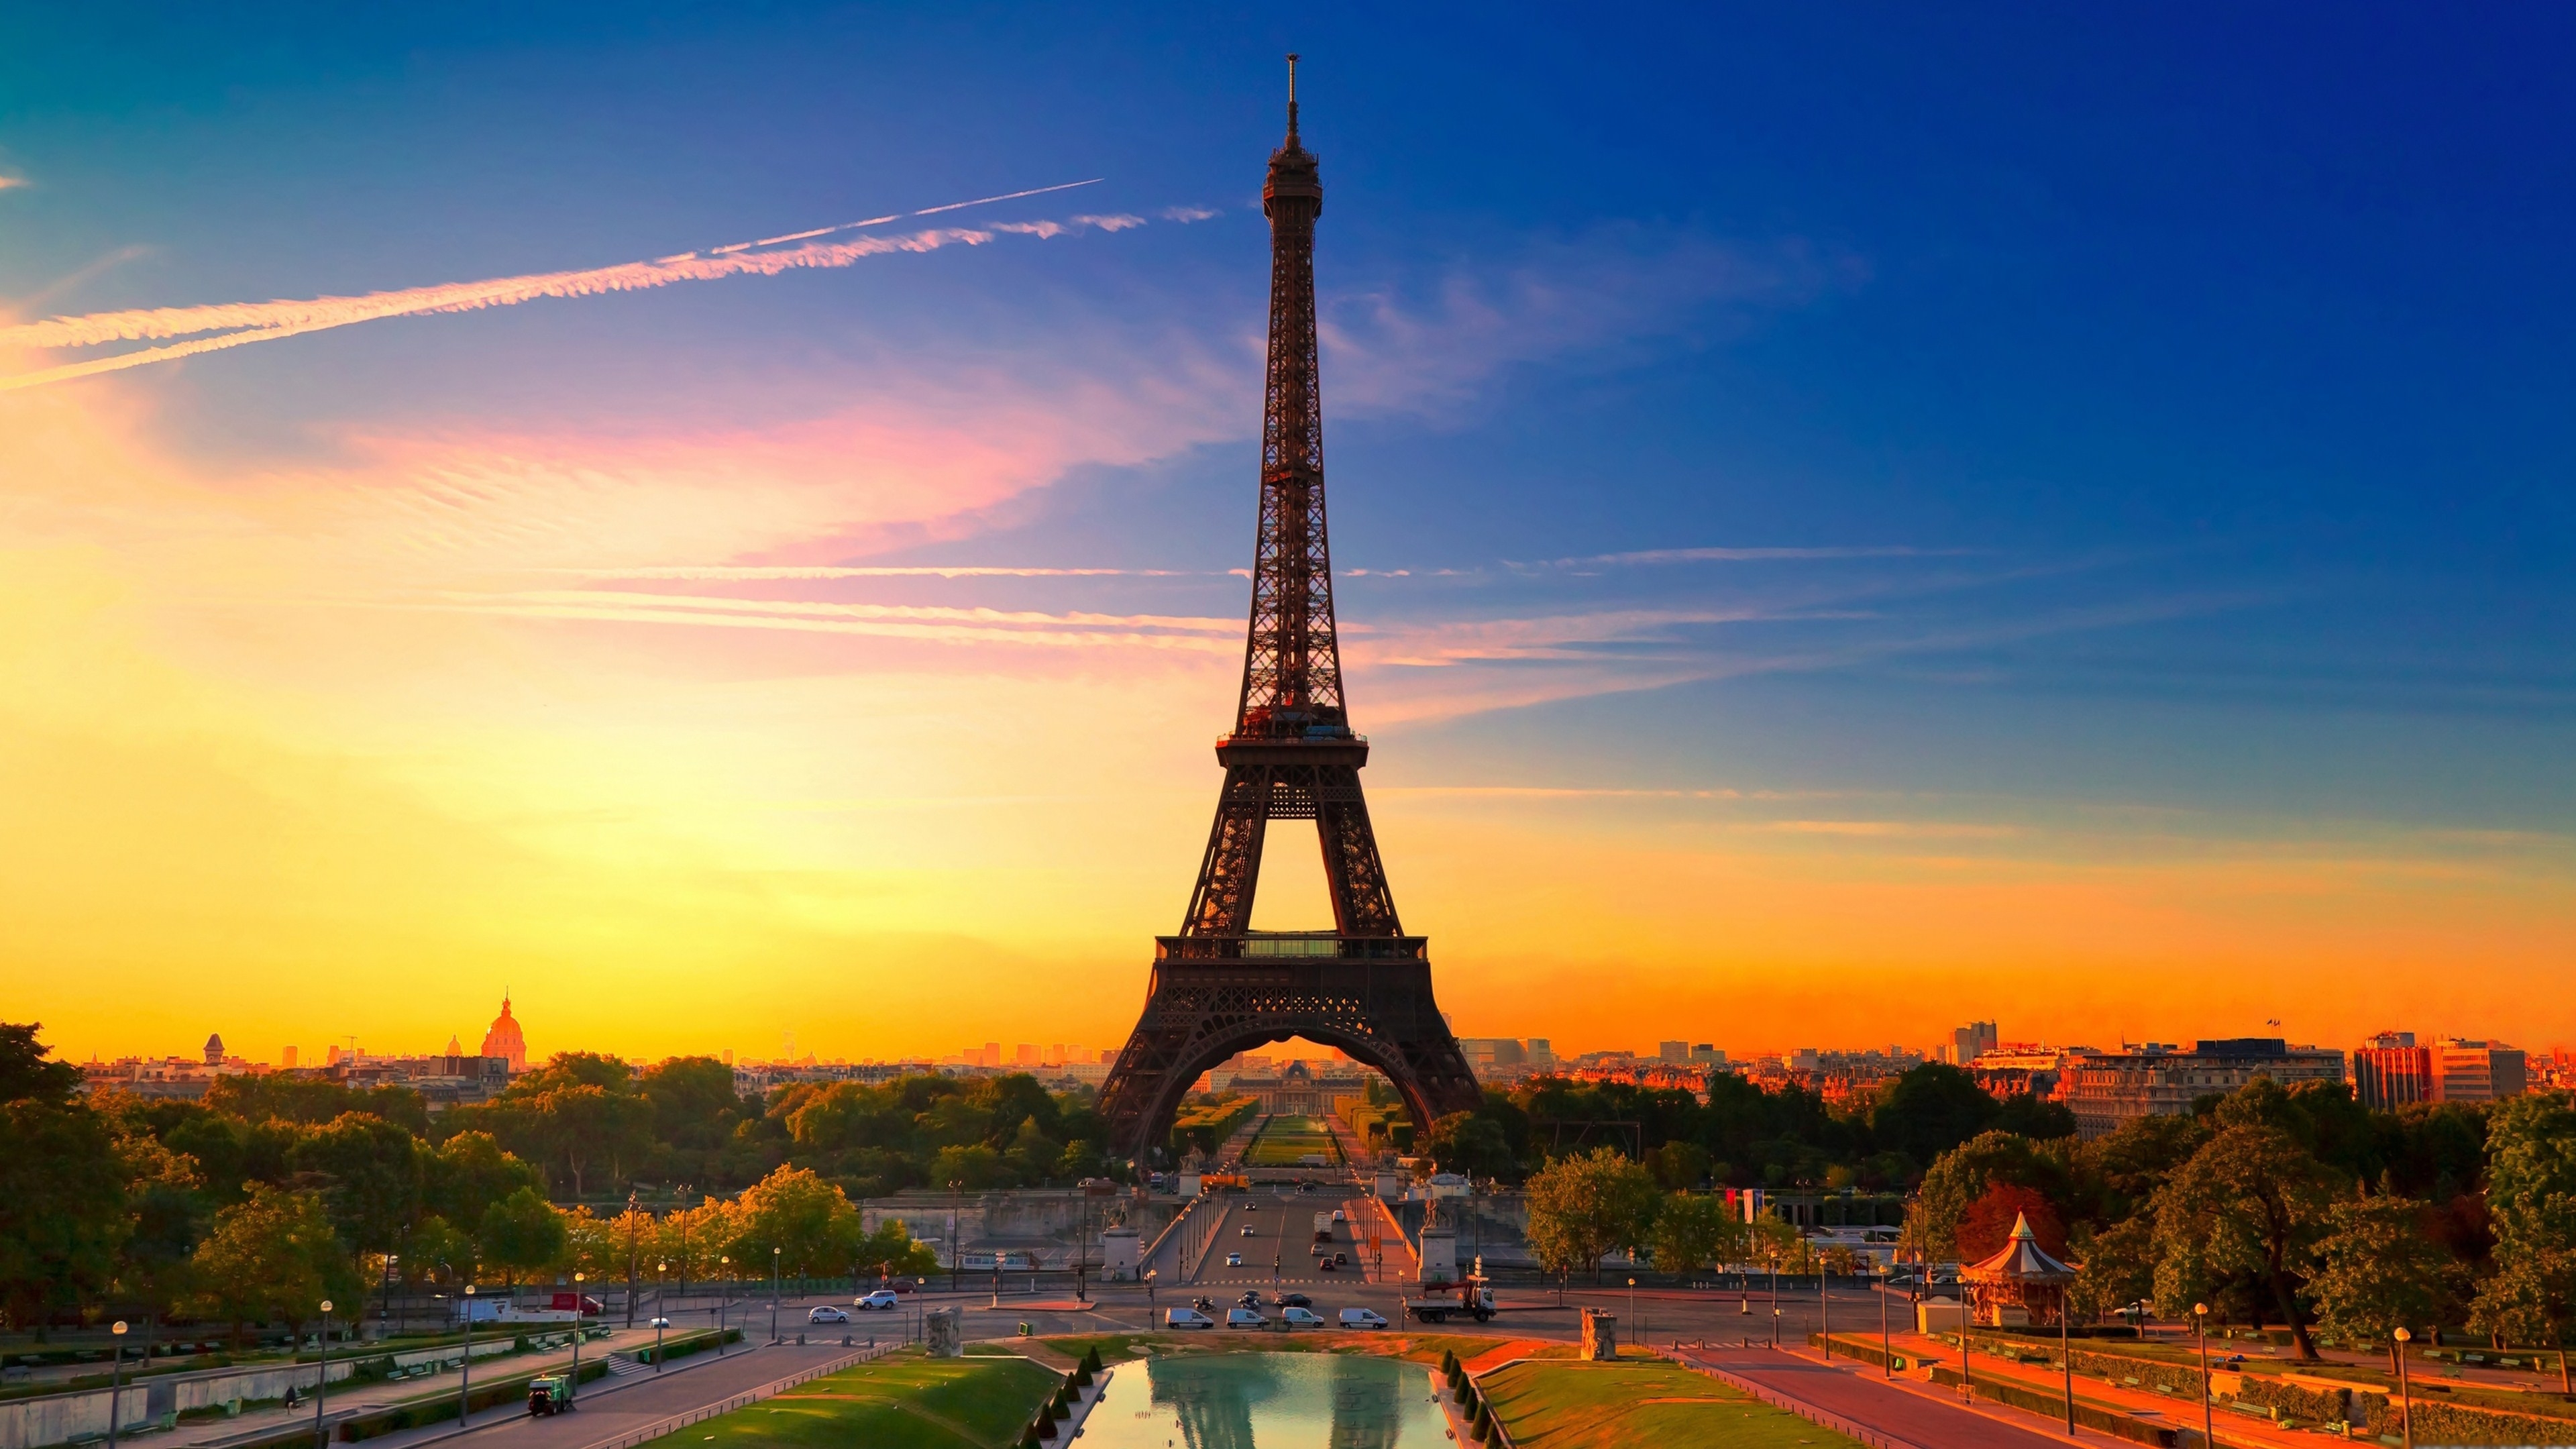 10 New Eiffel Tower Wallpaper Hd FULL HD 1920×1080 For PC Background